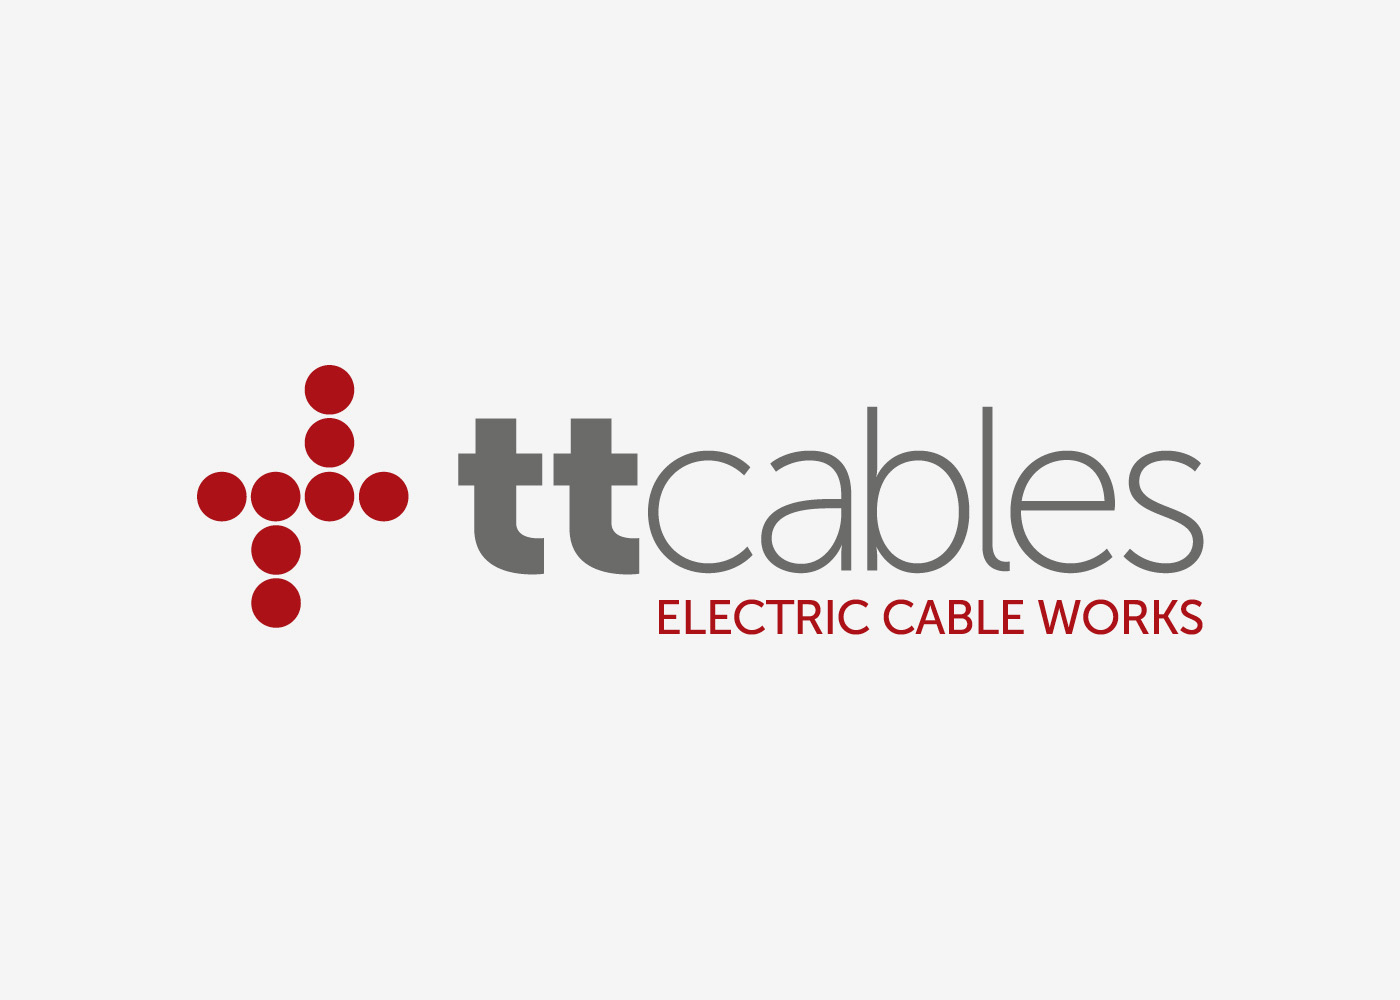 Visual Identity of a Cable Manufacturing Company